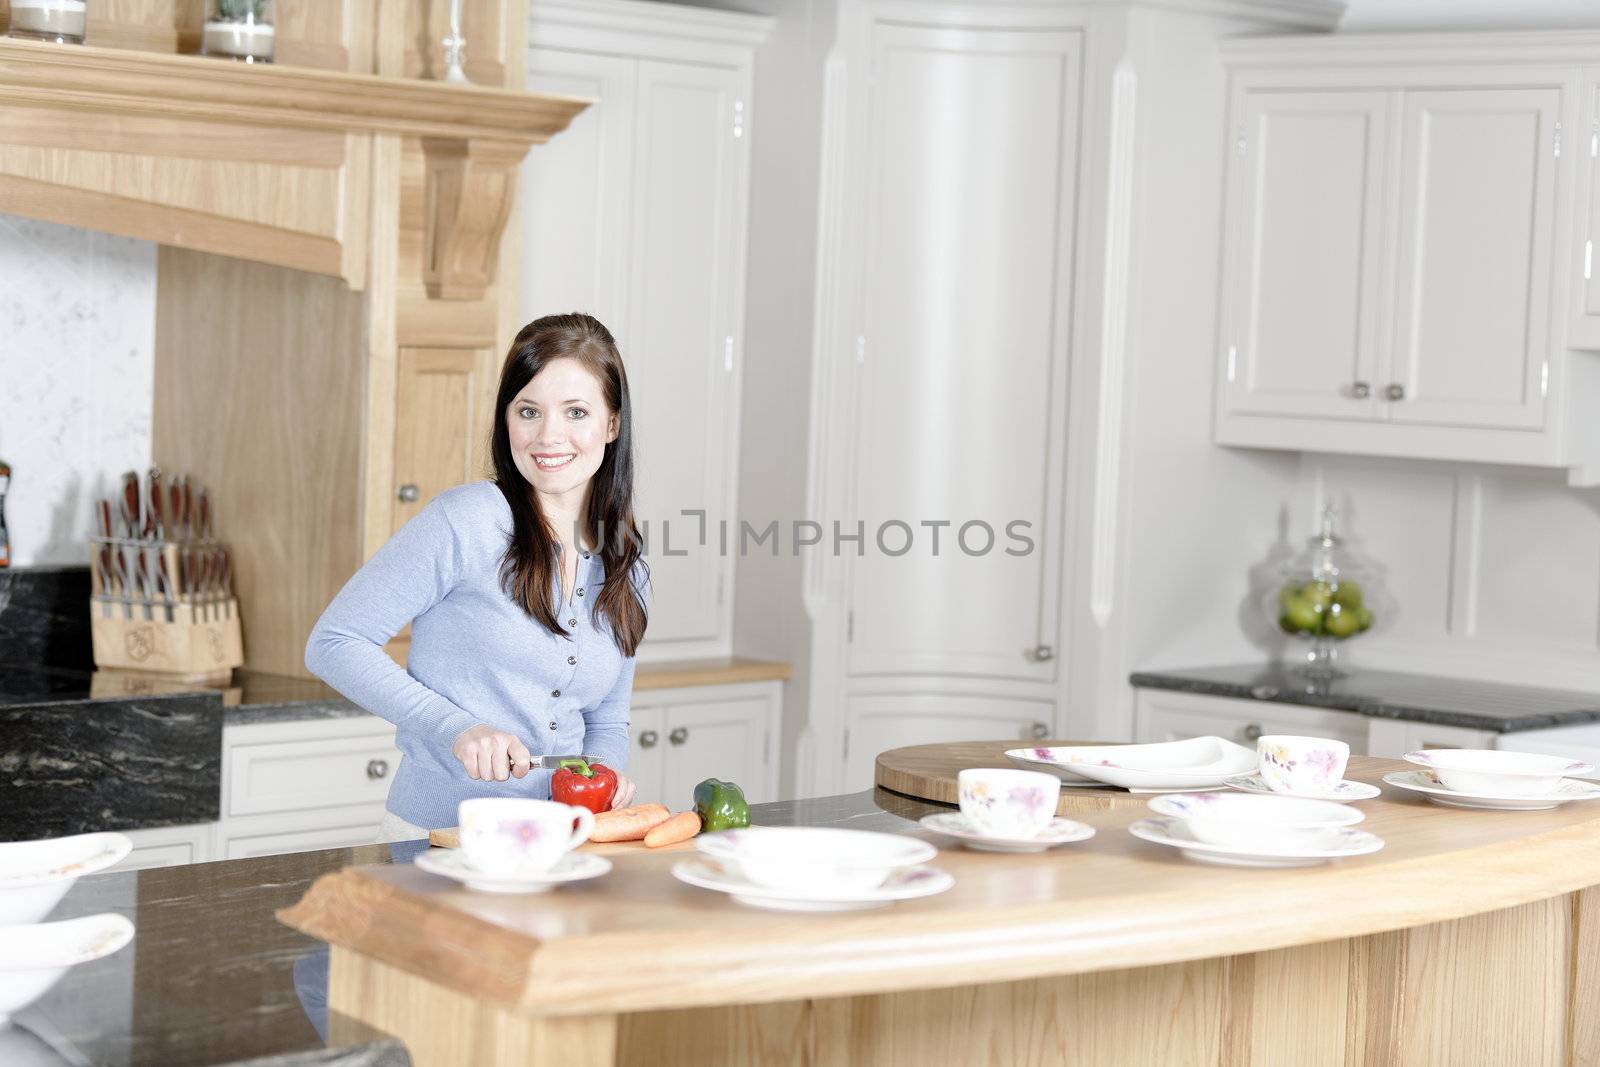 Woman preparing a meal in the kitchen by studiofi